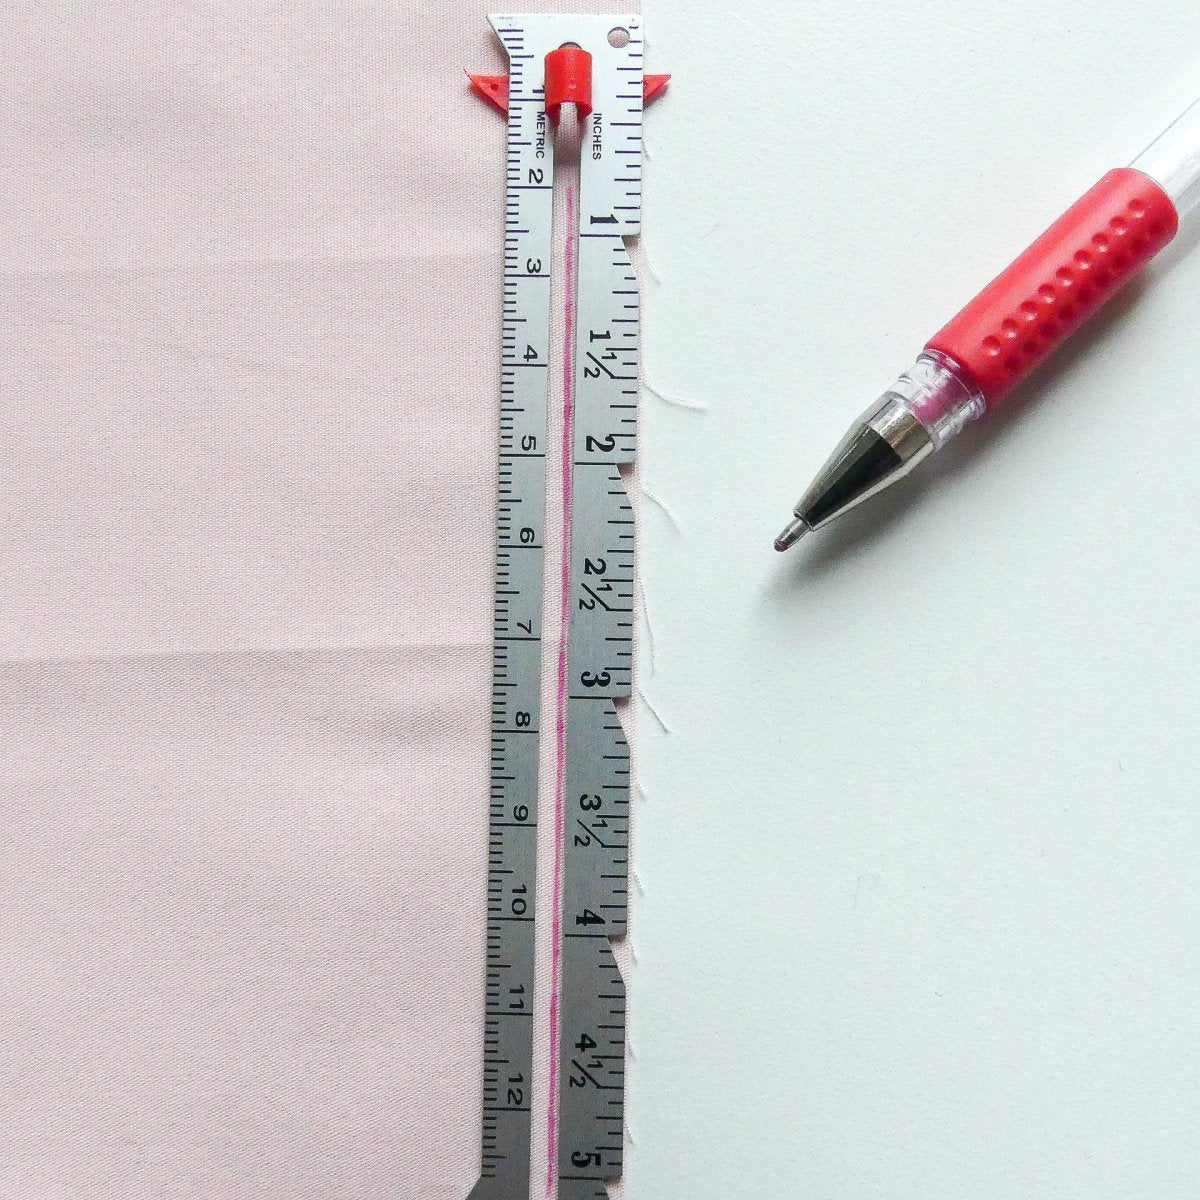 Pompotops School Supplies 2 Pieces Sewing Seam Gauge Ruler Sliding Gauge  Sewing Measuring Tool for Knitting Crafting Sewing Beginner Supplies